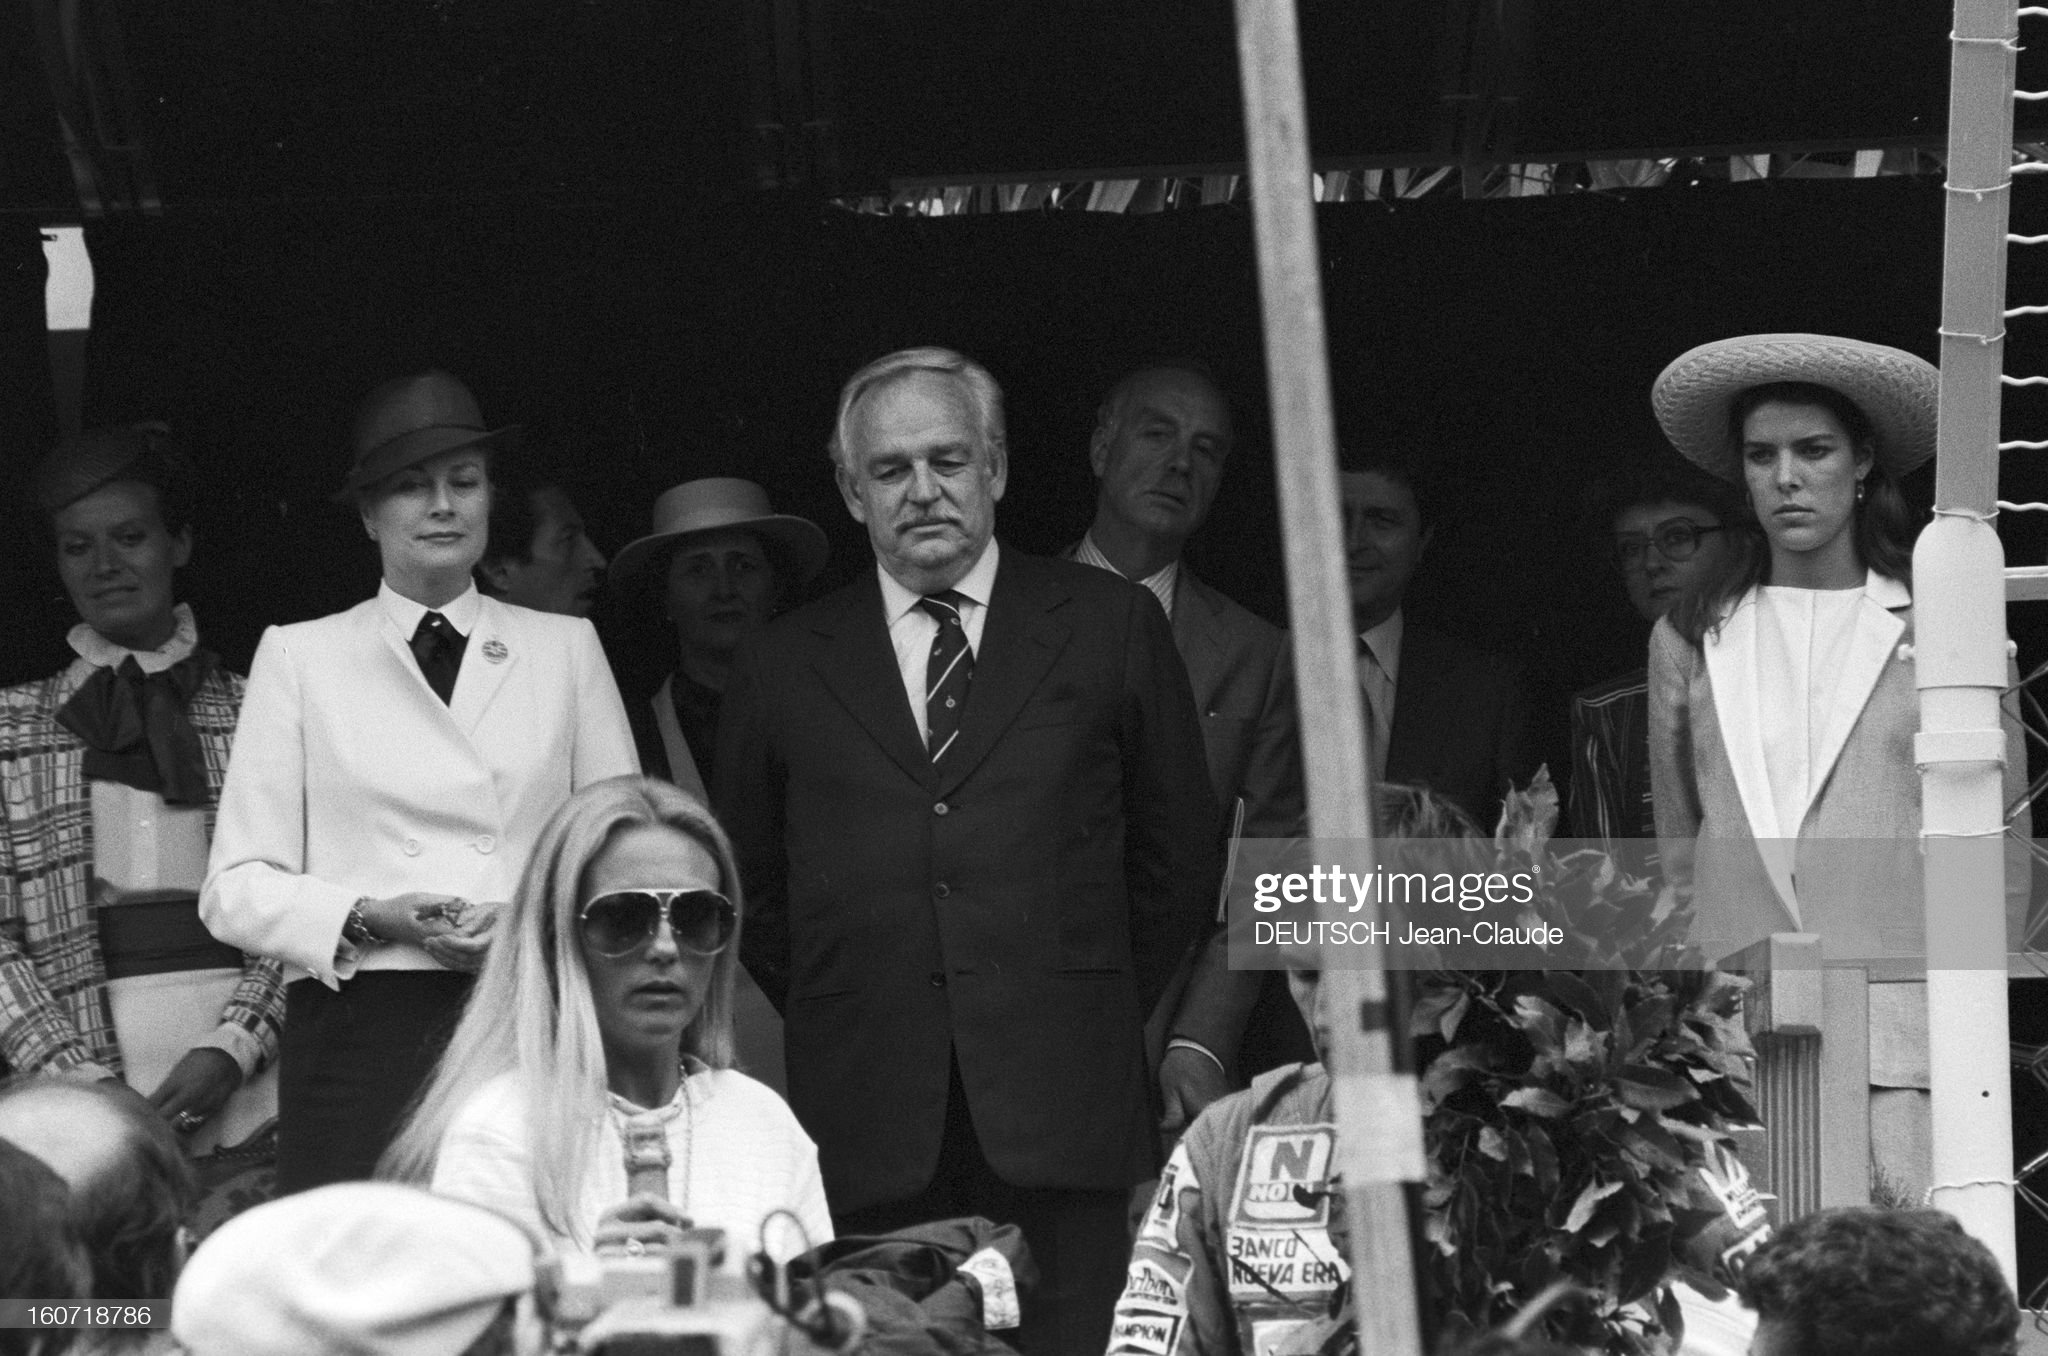 On May 18, 1980, at the Monaco Formula 1 Grand Prix, Grace of Monaco, Prince Rainier III of Monaco and their daughter Caroline, during the awarding of the trophy to the winner Carlos Reutemann.